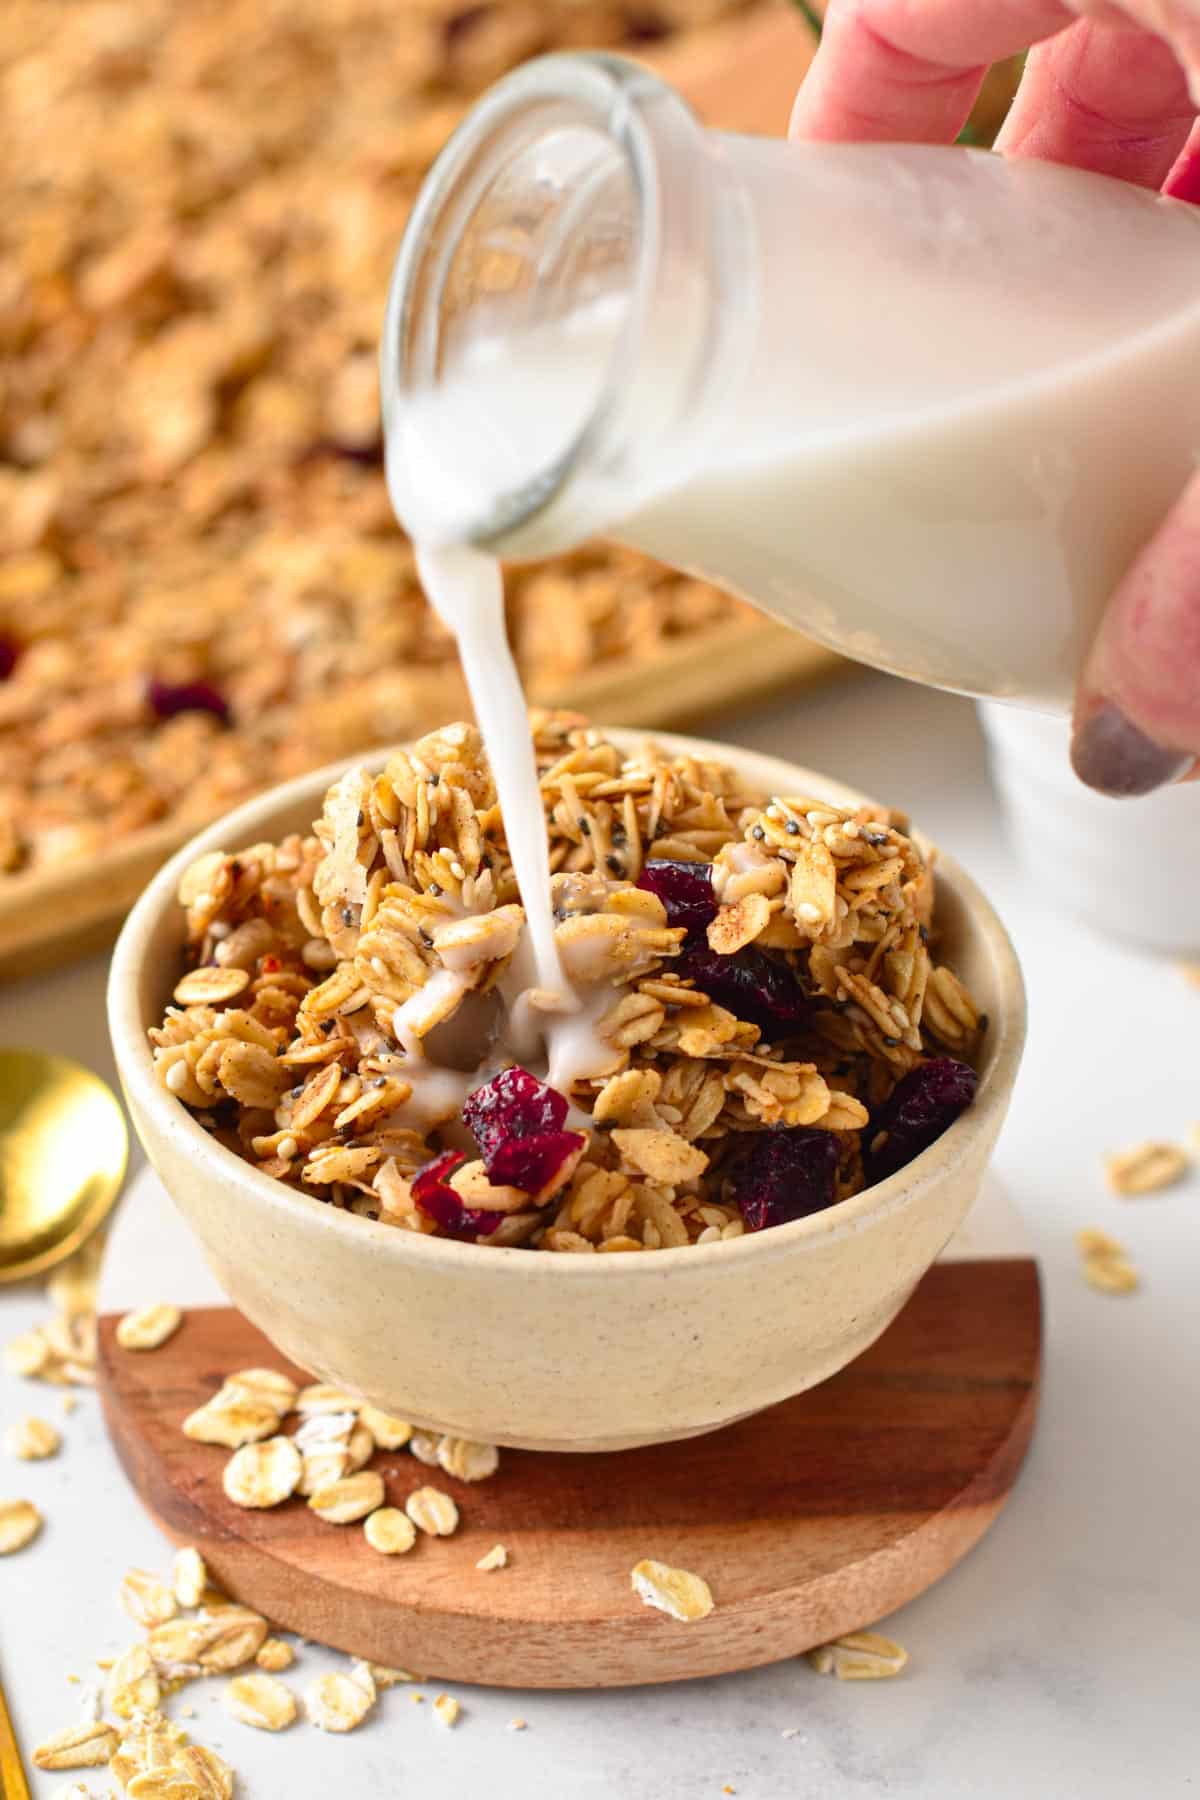 This nut-free granola recipe is the best breakfast cereal recipe if you have nut allergies.